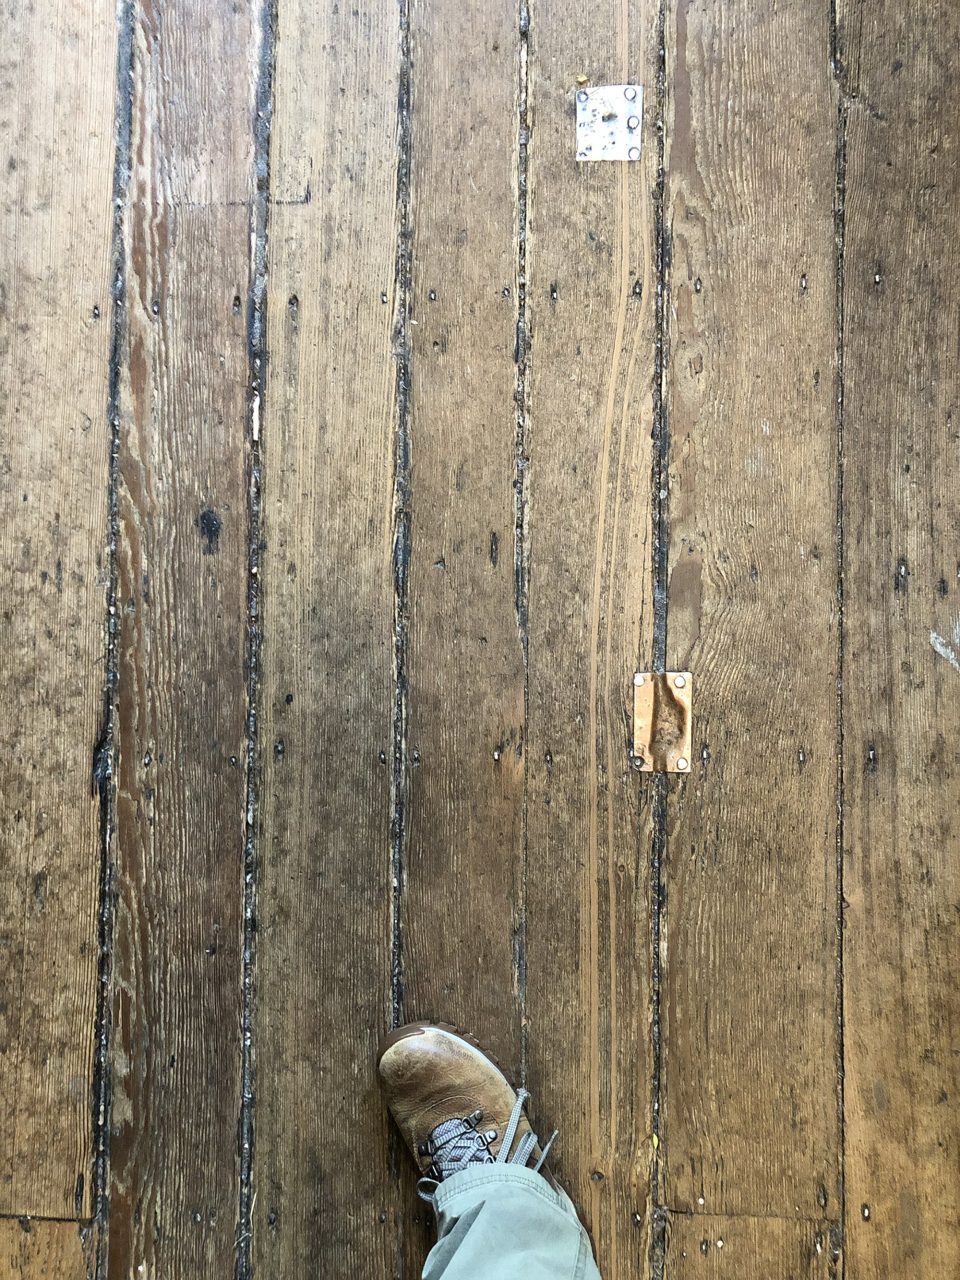 Floor boards inside Harrison Brothers Hardware. How many people must have walked across the wooden floorboards since 1901.